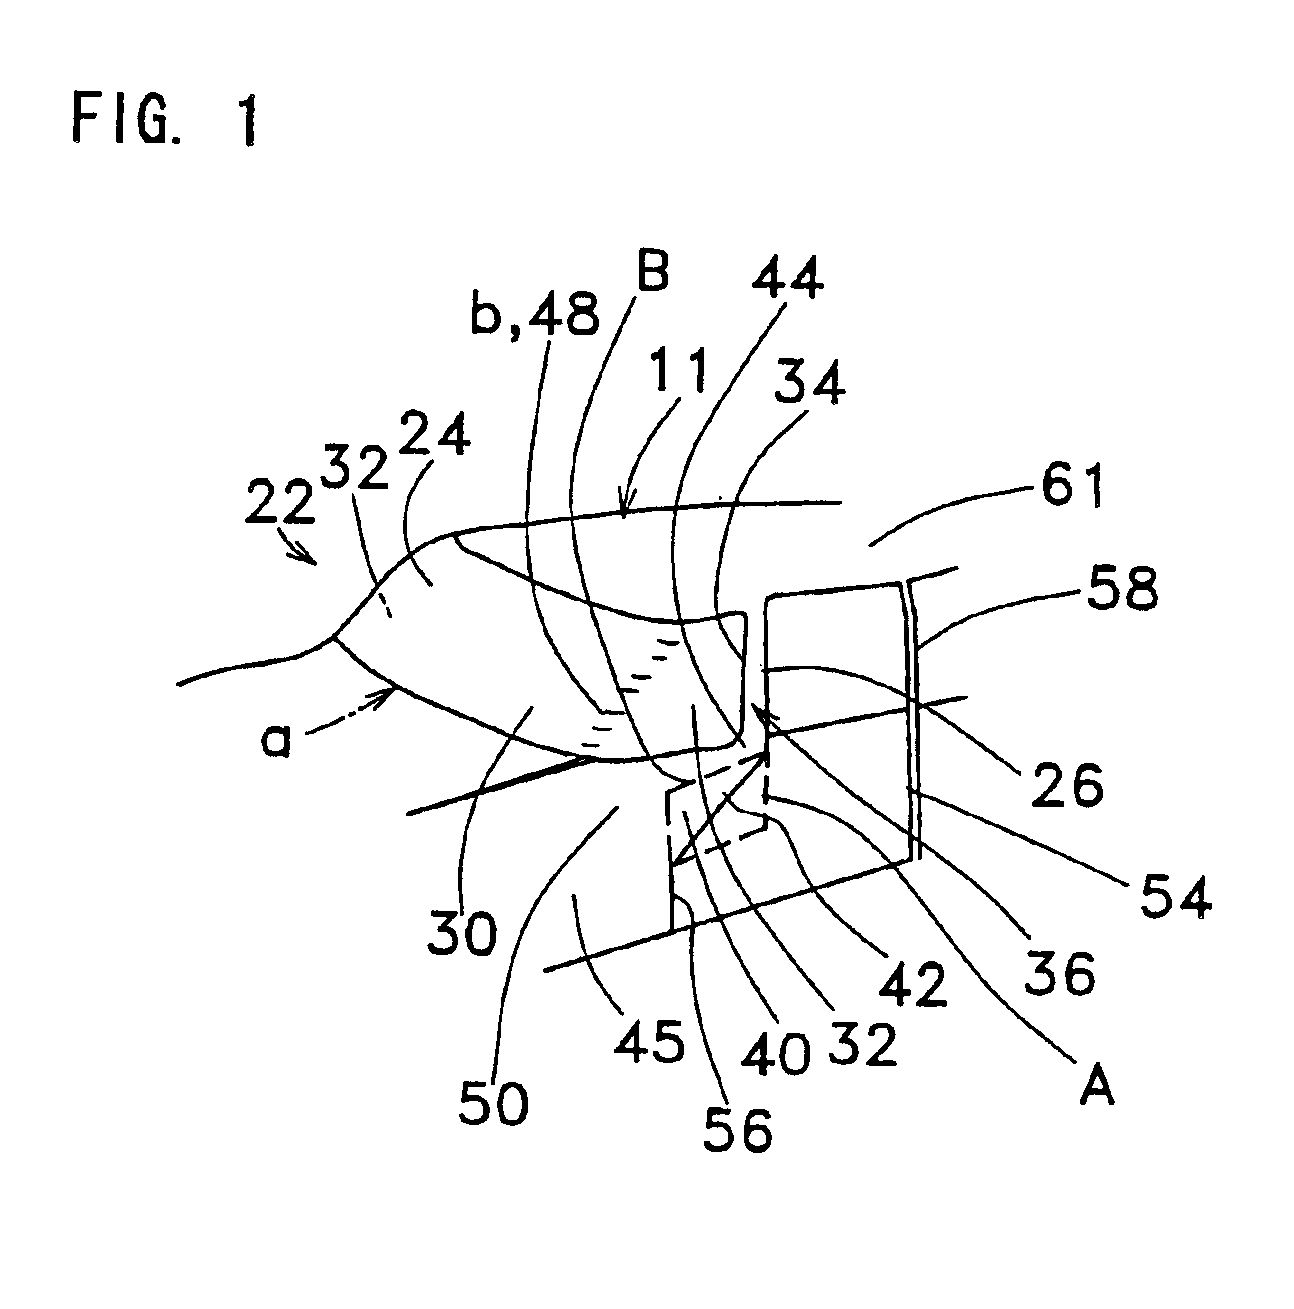 Windshield fixing structure for reducing dead visibility angle produced by front pillar